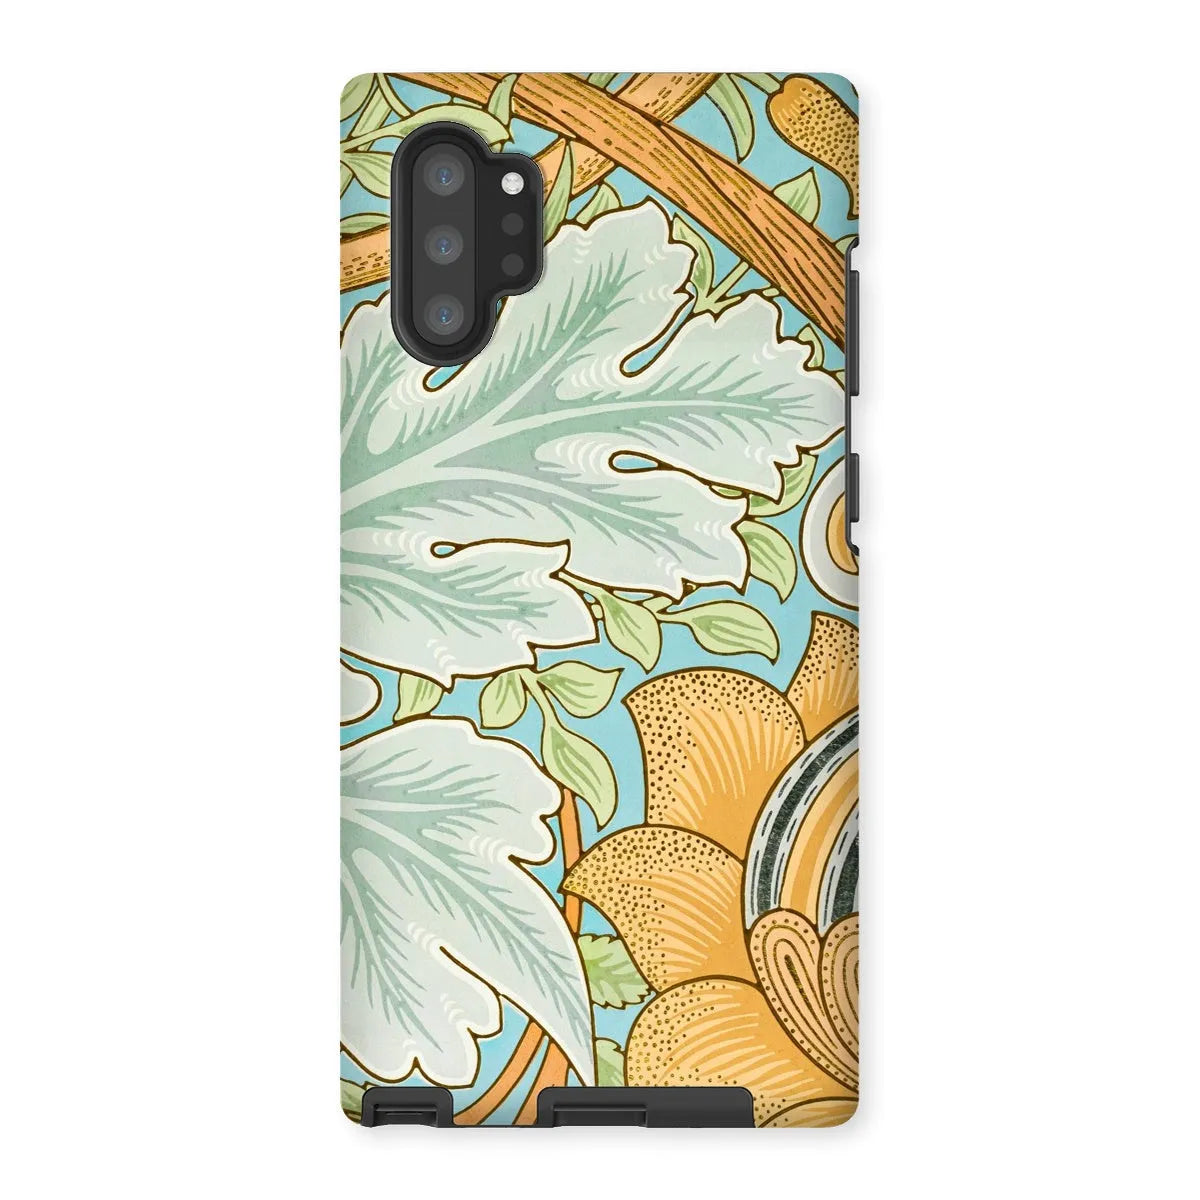 St. James - Arts And Crafts Phone Case - William Morris - Samsung Galaxy Note 10p / Matte - Mobile Phone Cases